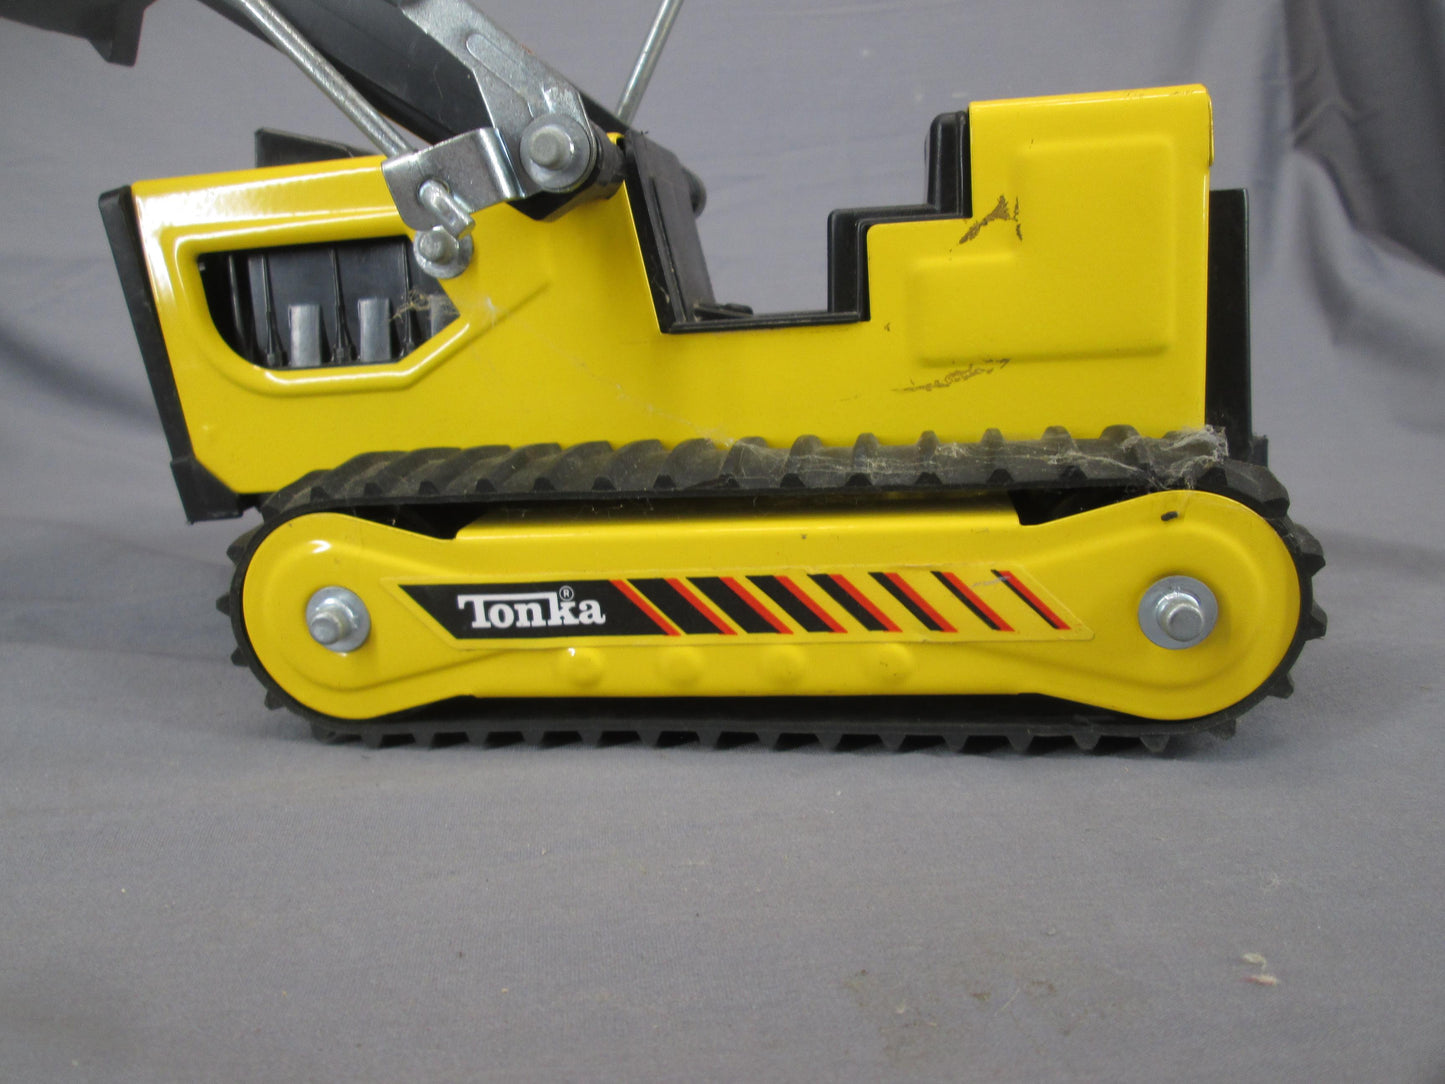 0122 - Old Tonka Tracked Front Loader